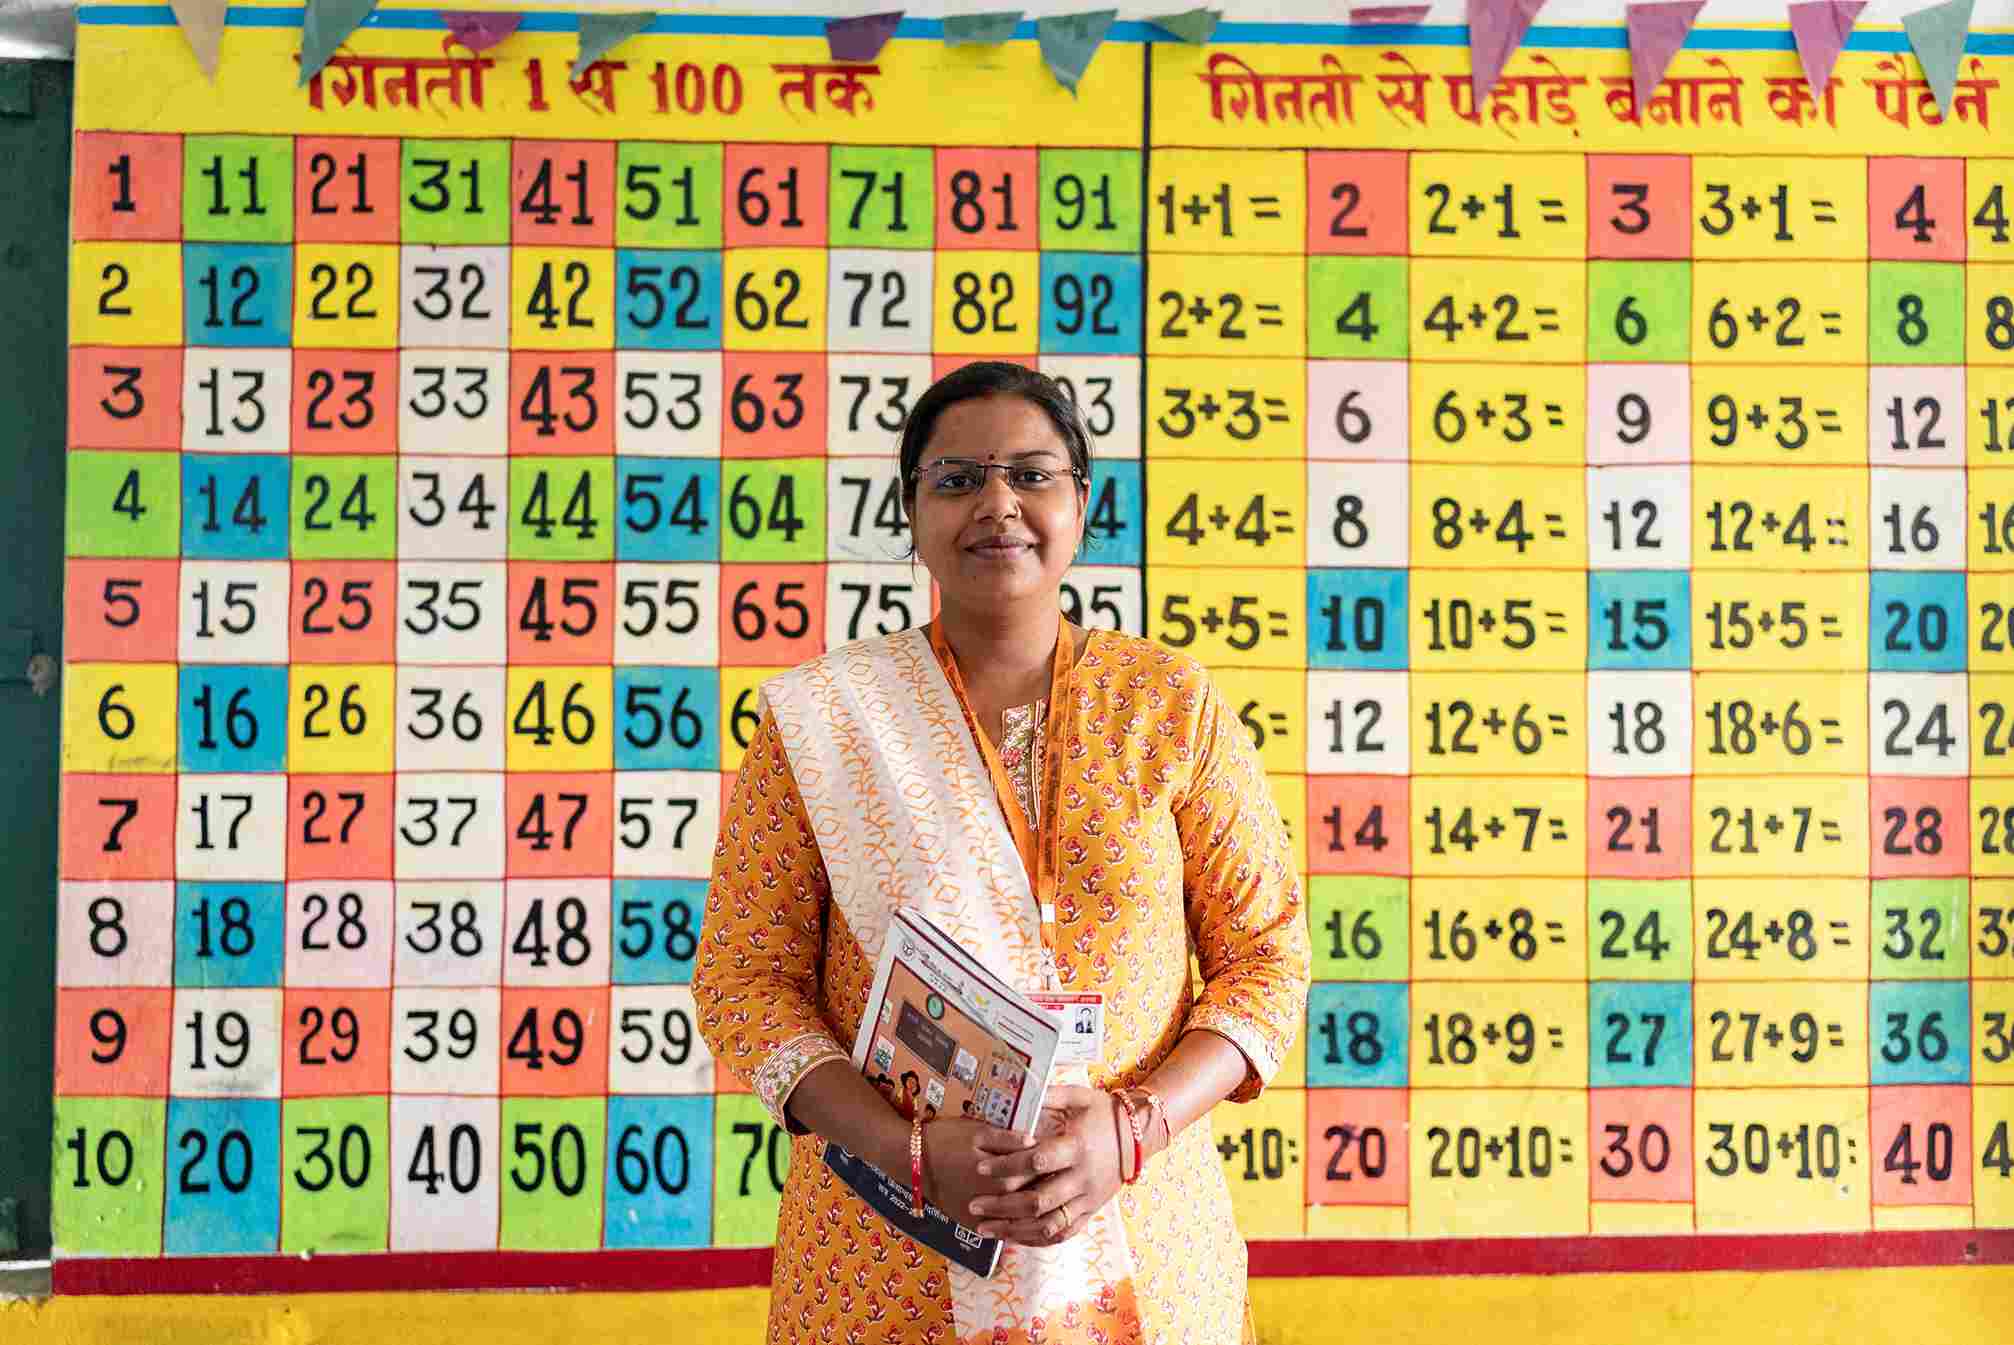 One Programme Helps Teachers Across 12 States Improve Learning Outcomes for Children